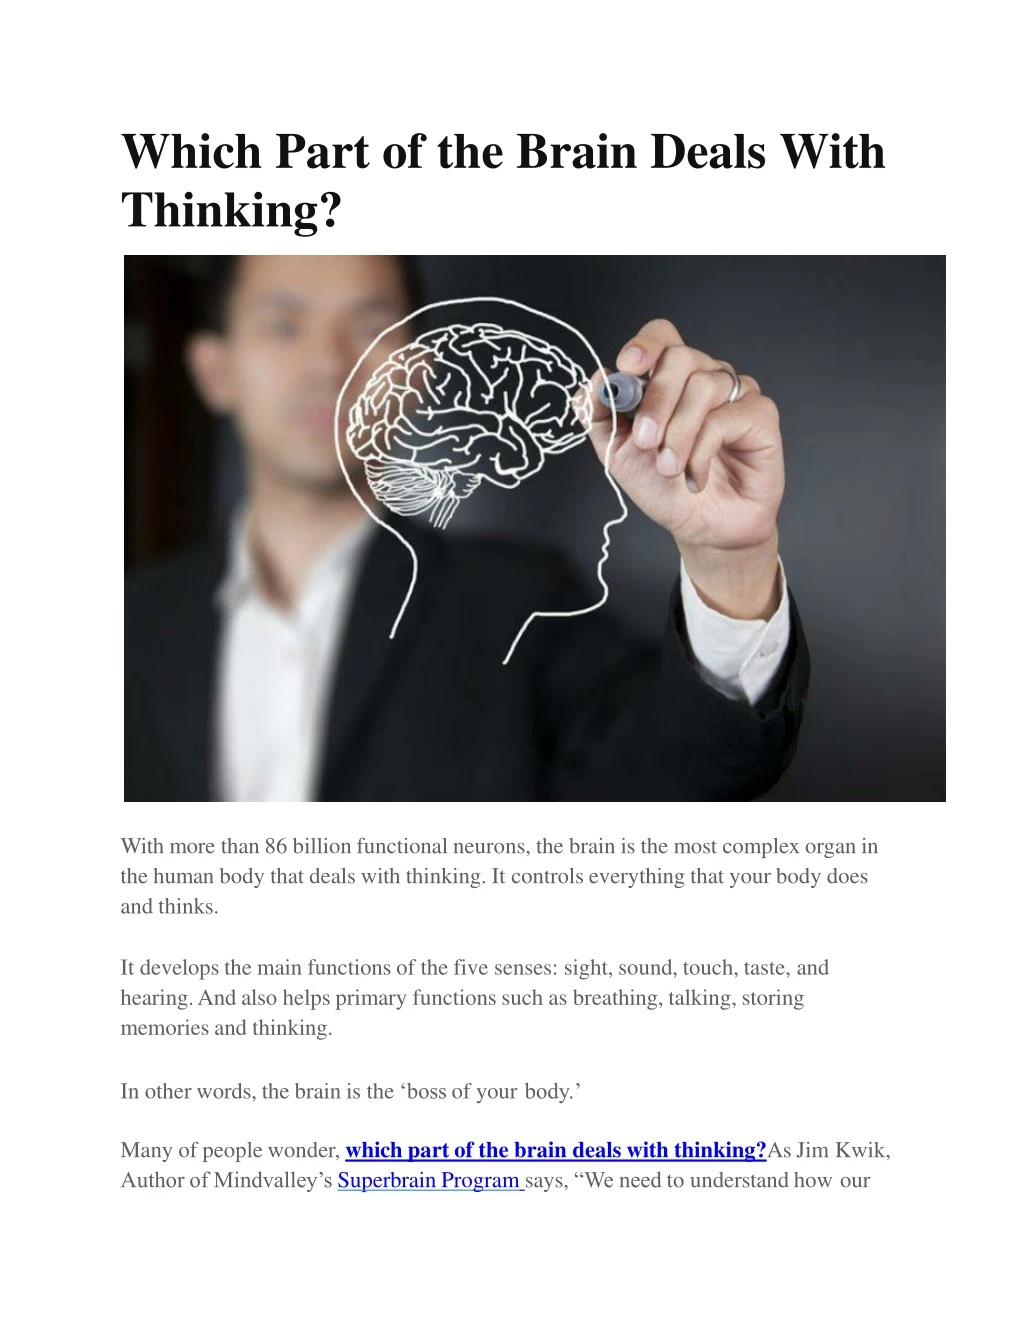 which part of the brain deals with thinking